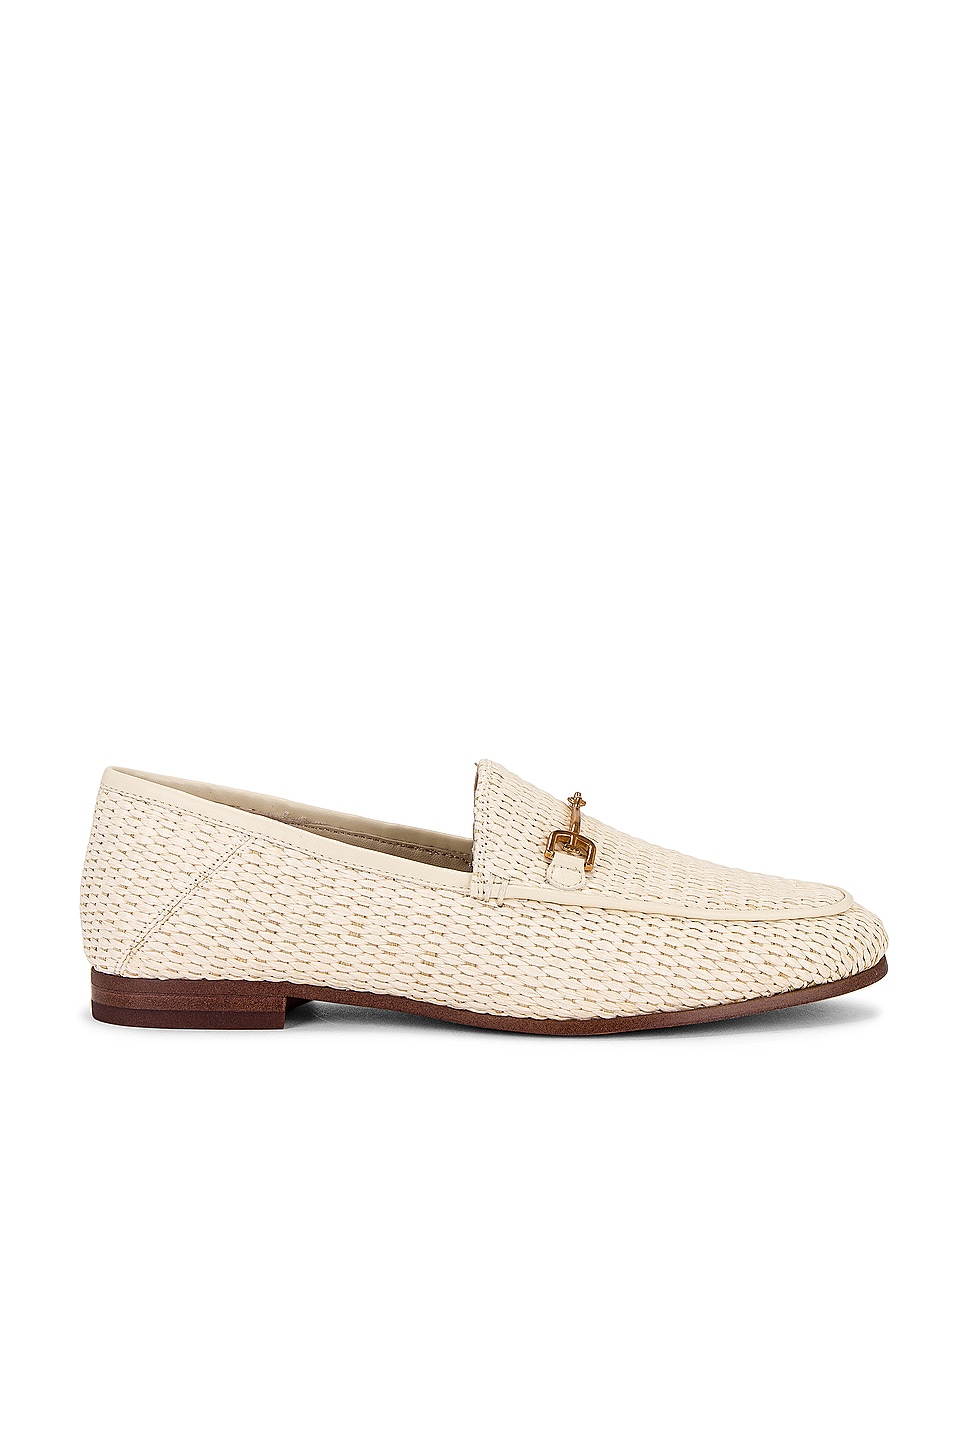 Women's flats for spring: Shop mesh flats, loafers and more - Good ...